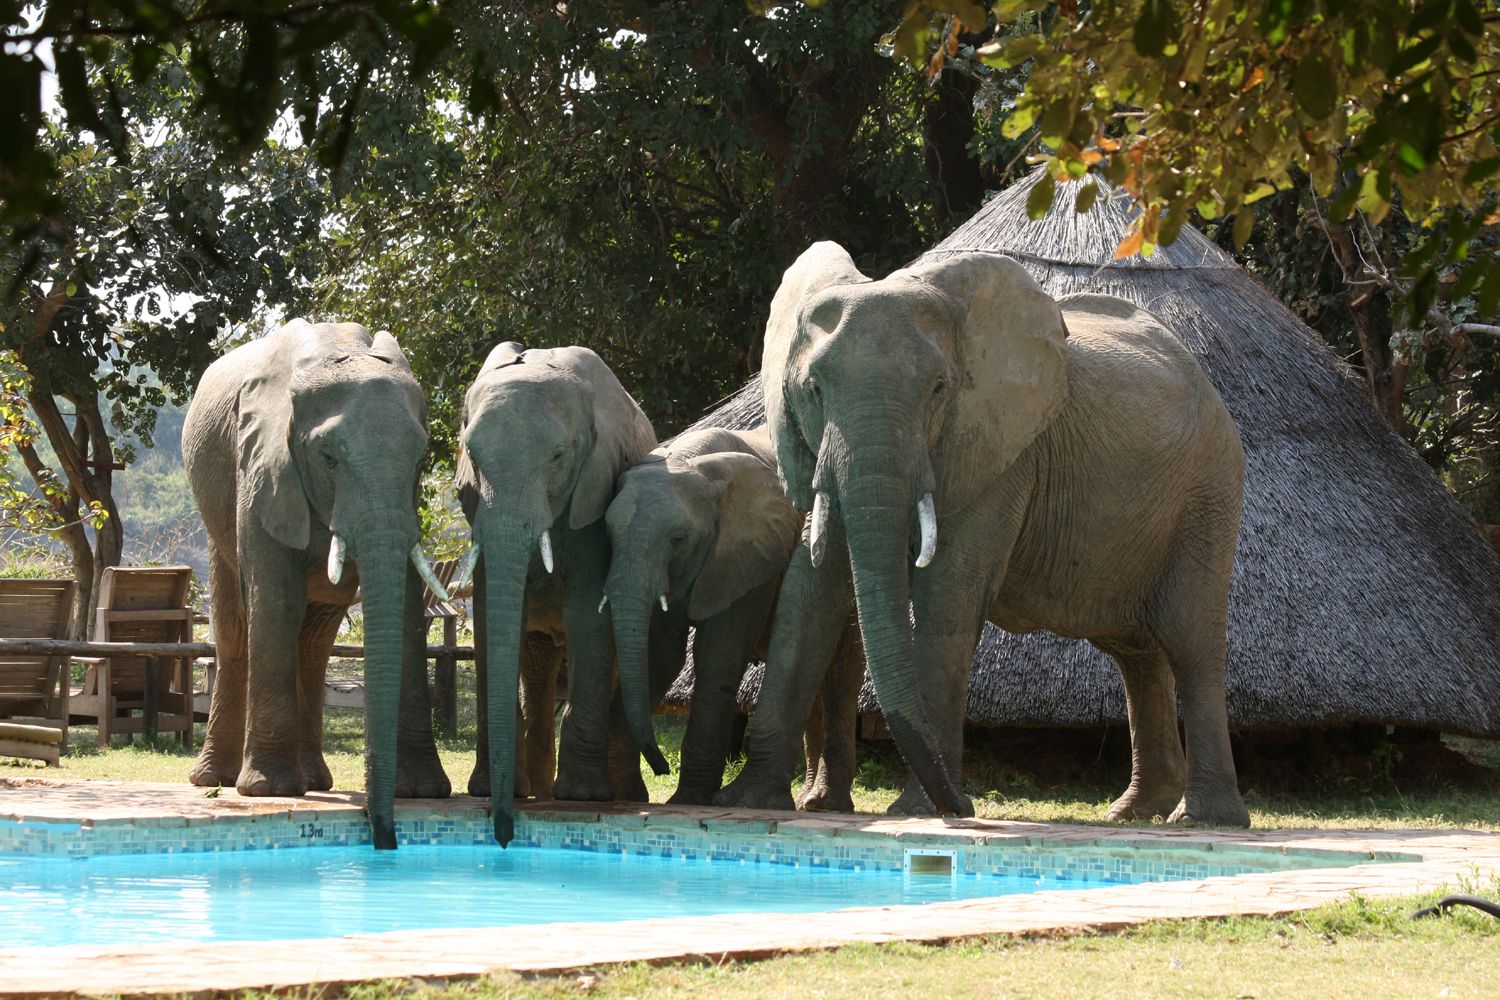 Elephants-drinking-from-pool